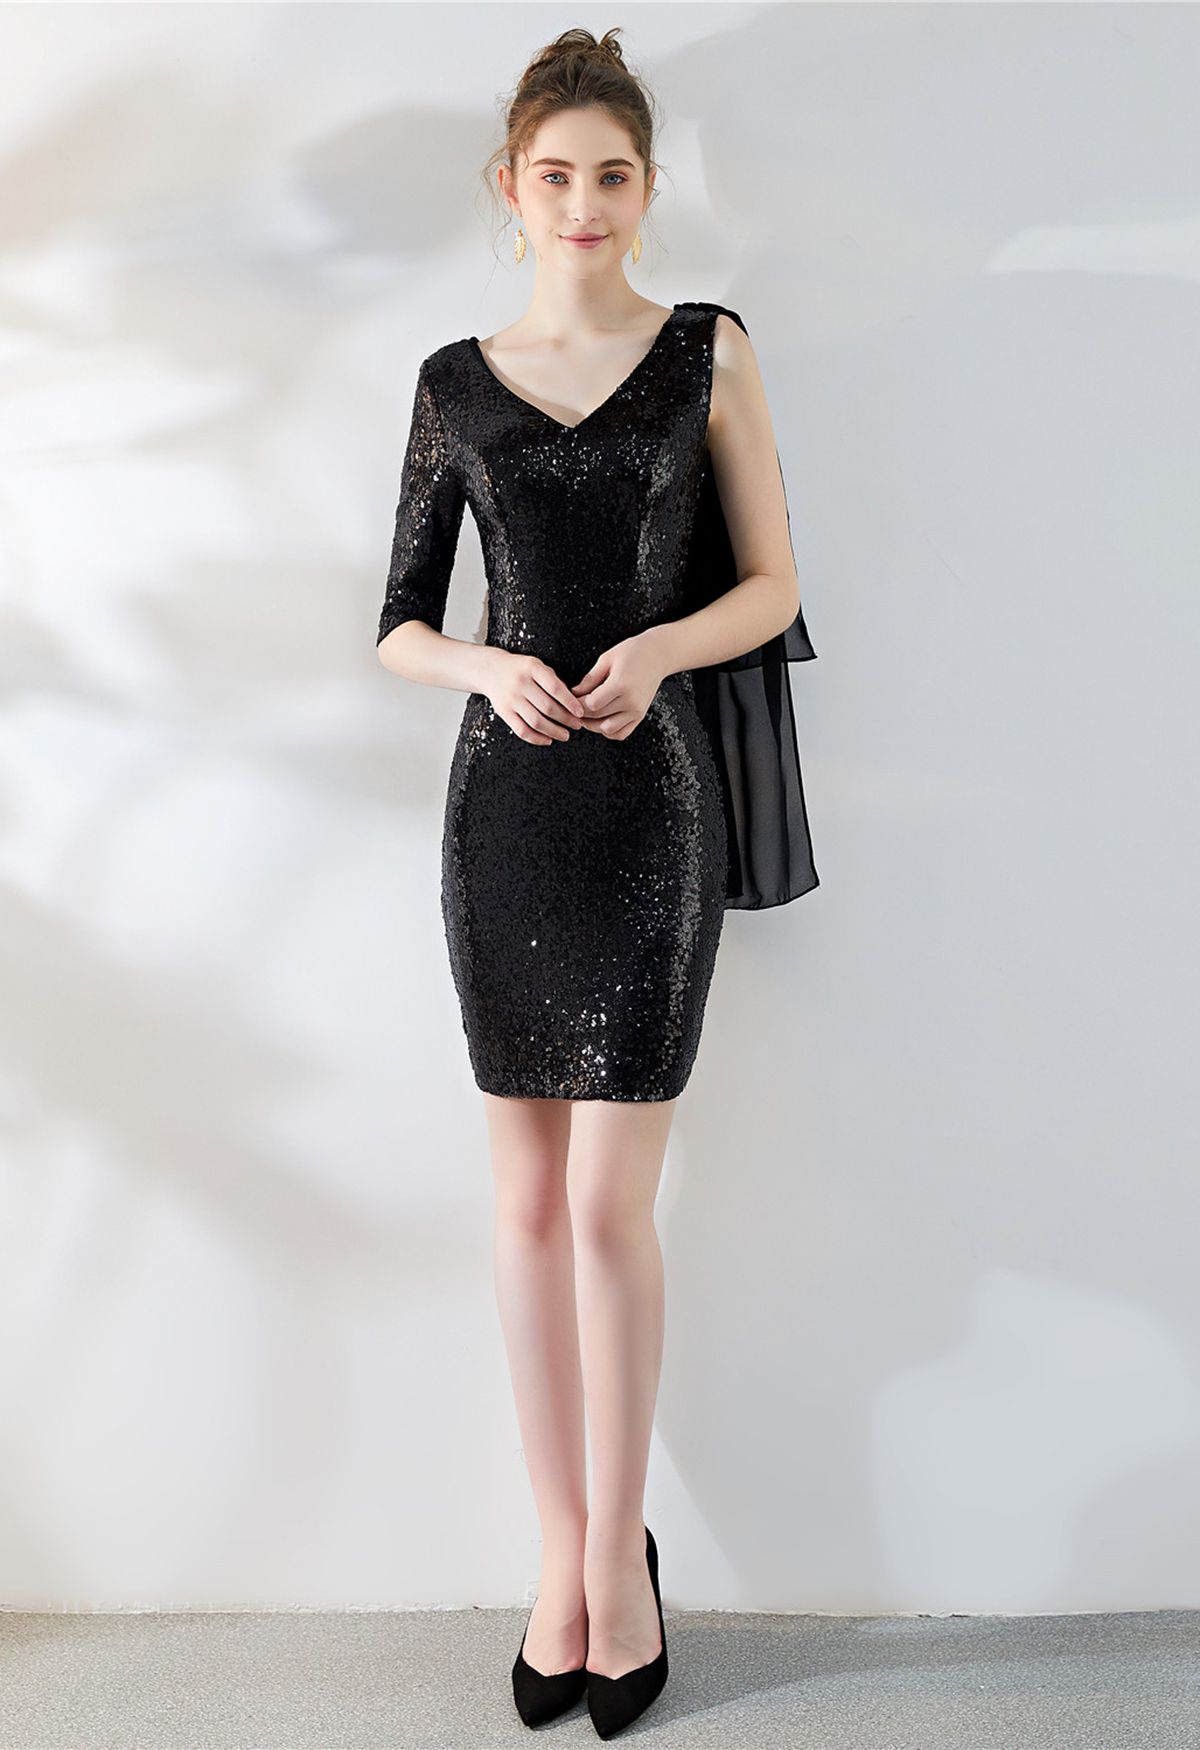 V-Neck Chiffon Spliced Sequined Cocktail Dress in Black - Retro, Indie ...